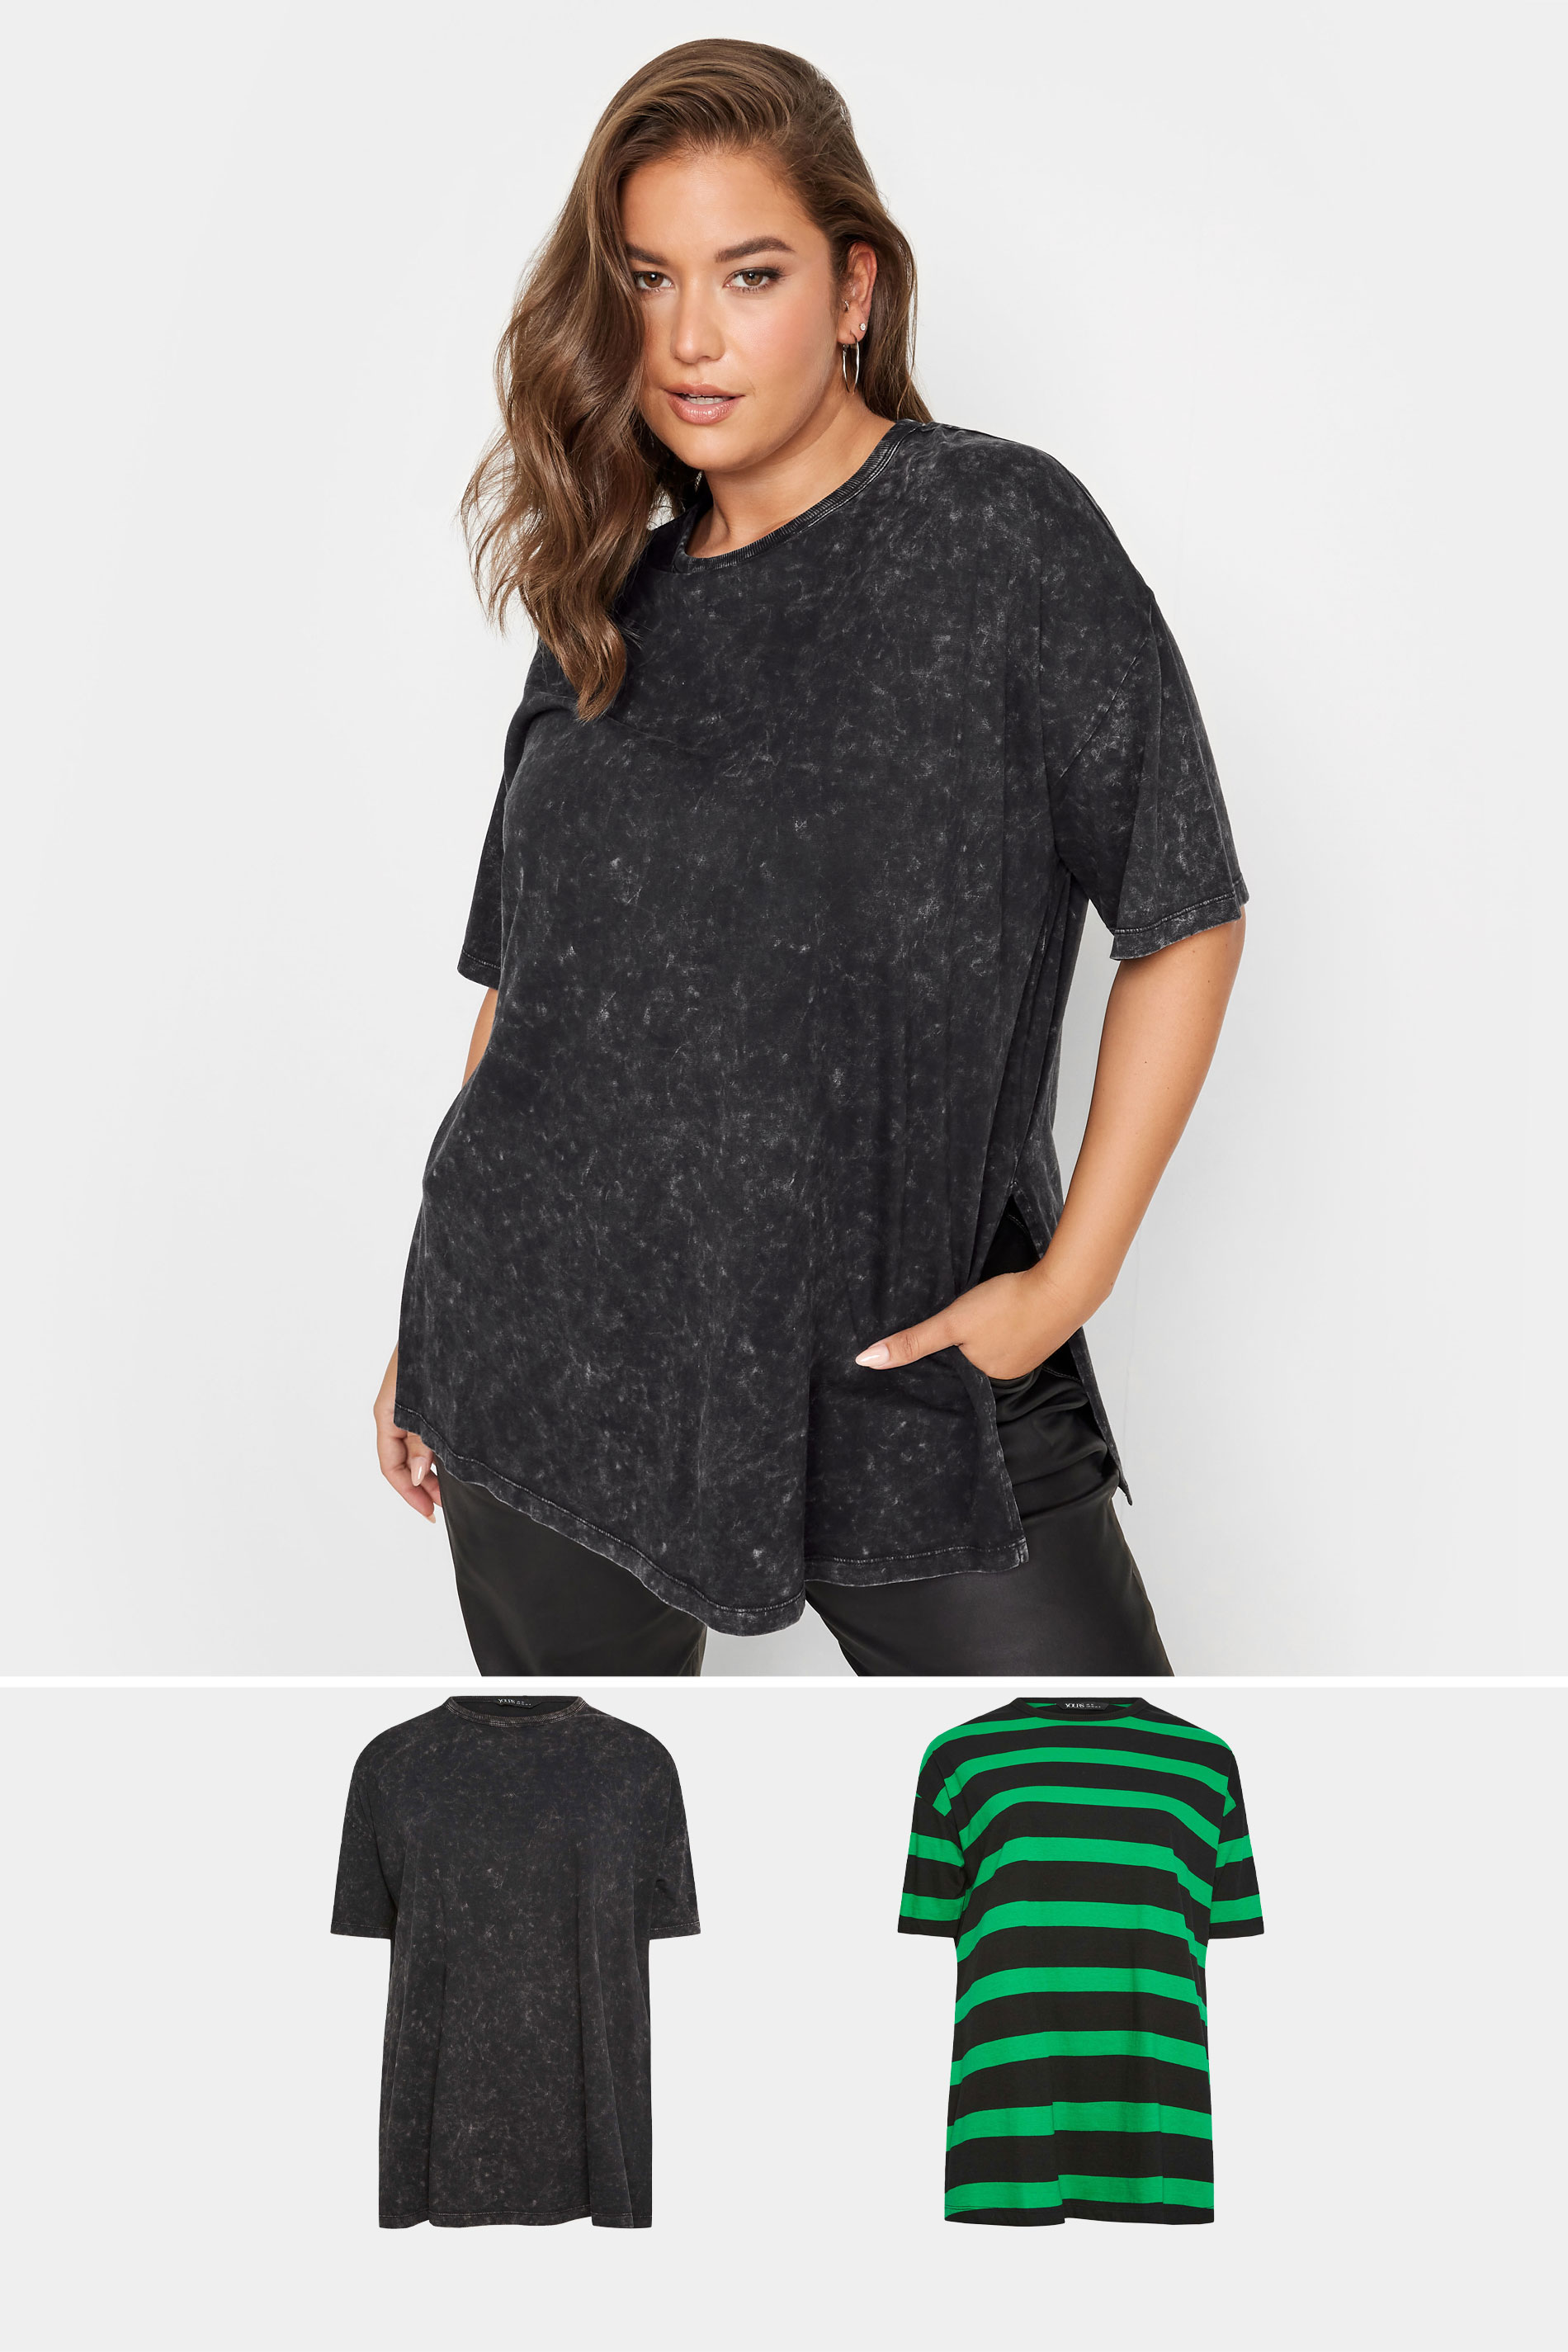 YOURS Plus Size 2 PACK Grey & Green Stripe Oversized Boxy T-Shirt | Yours Clothing 1